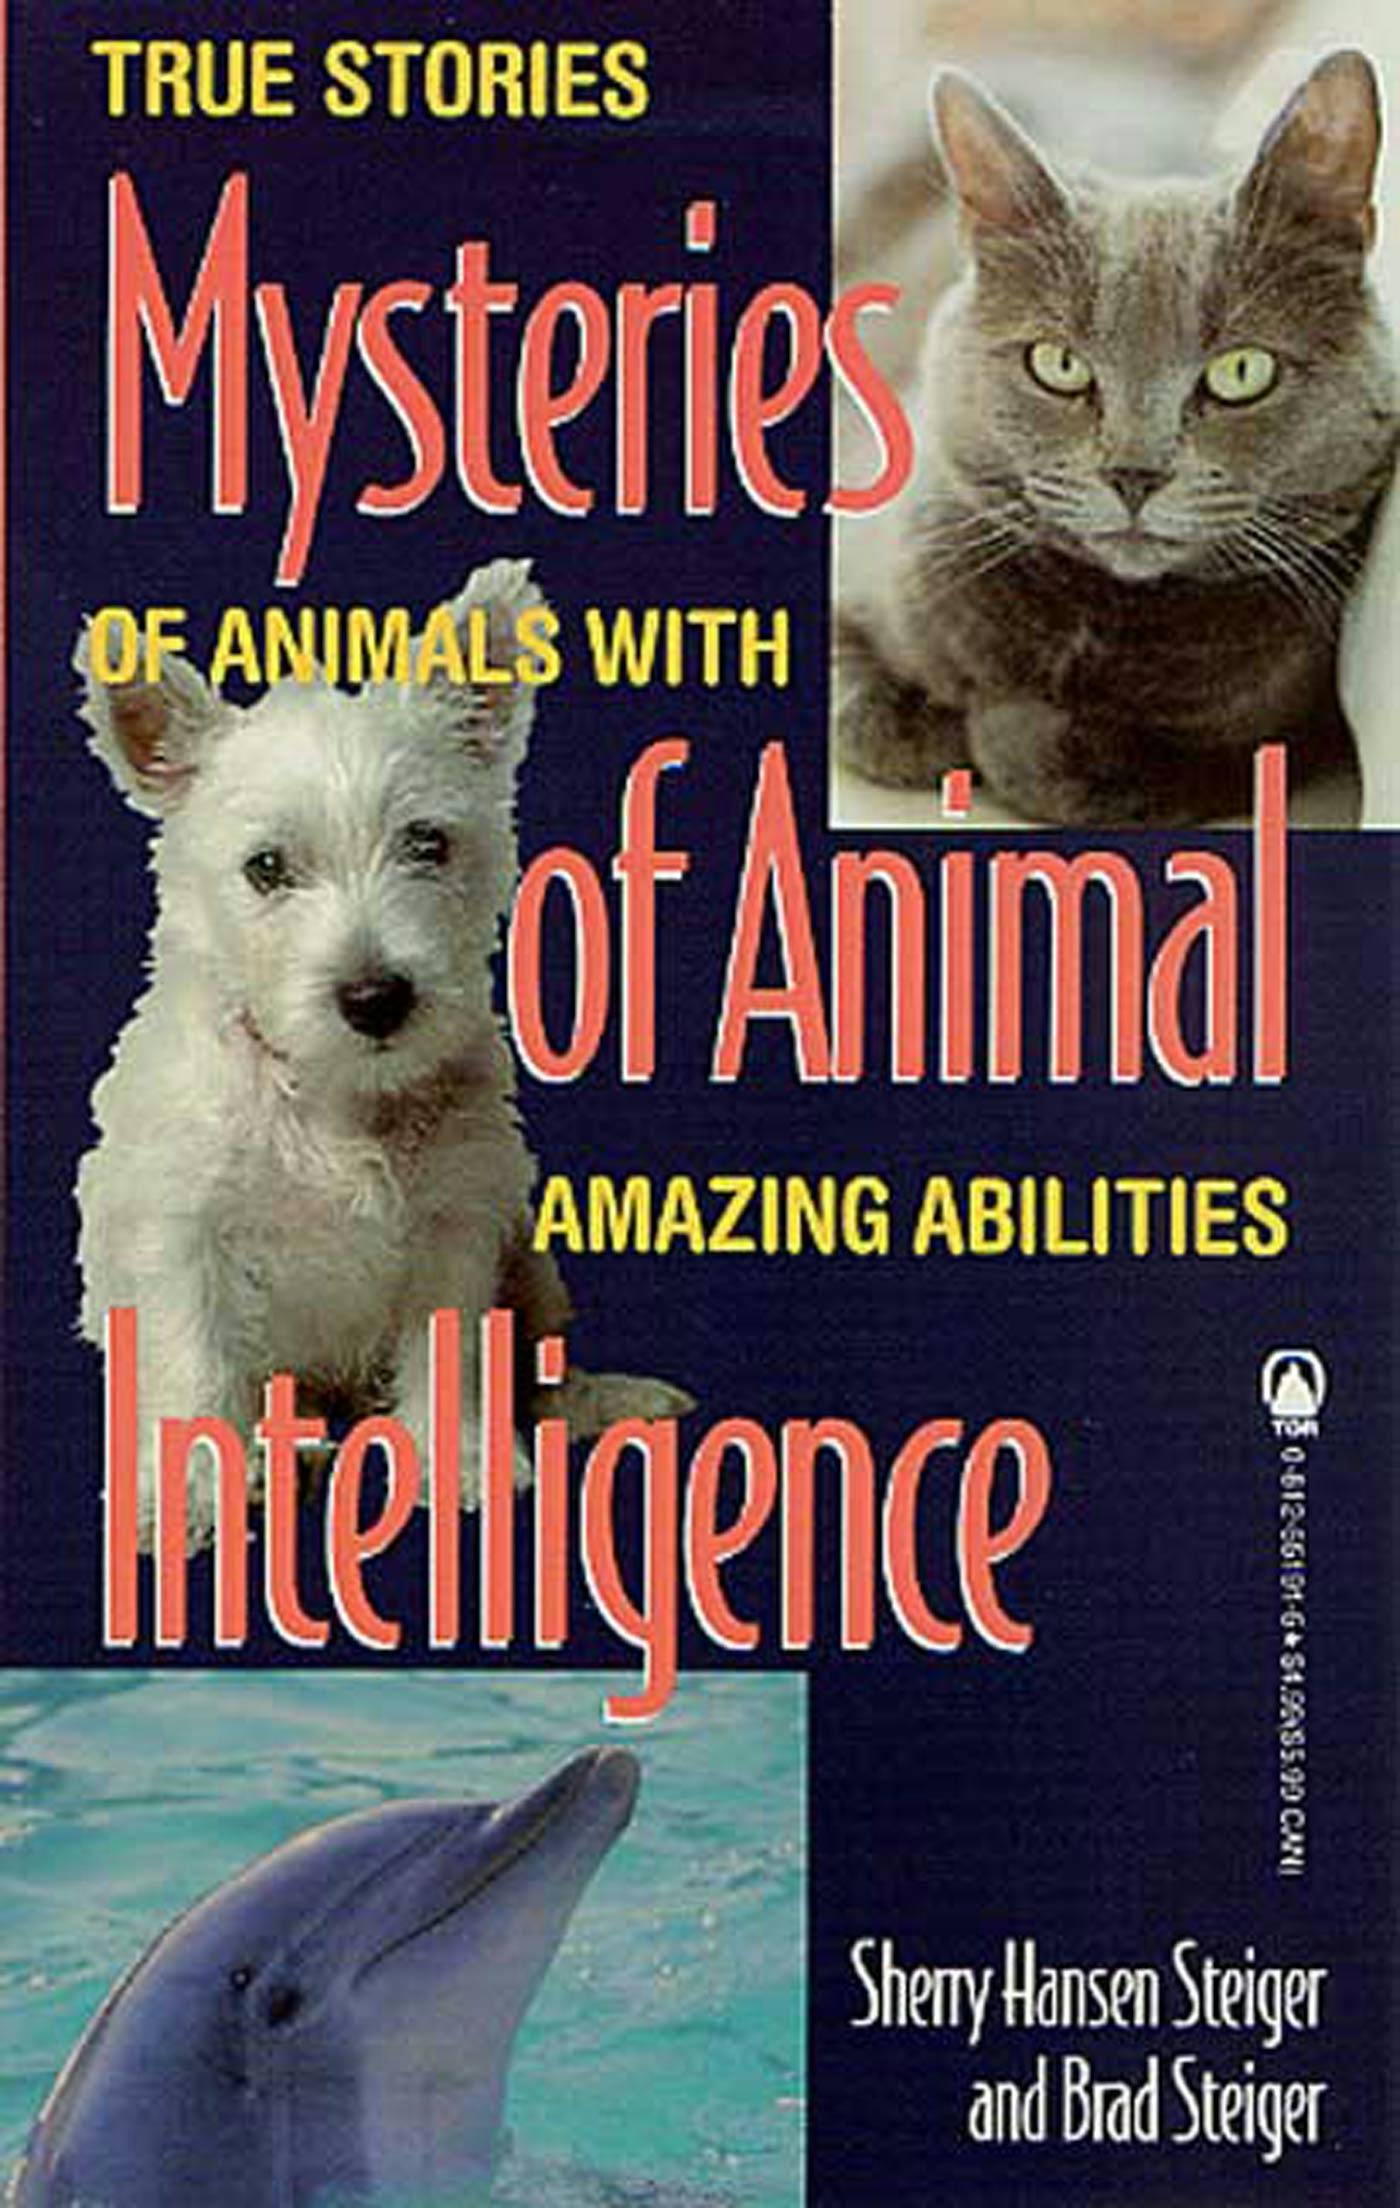 Cover for the book titled as: The Mysteries of Animal Intelligence